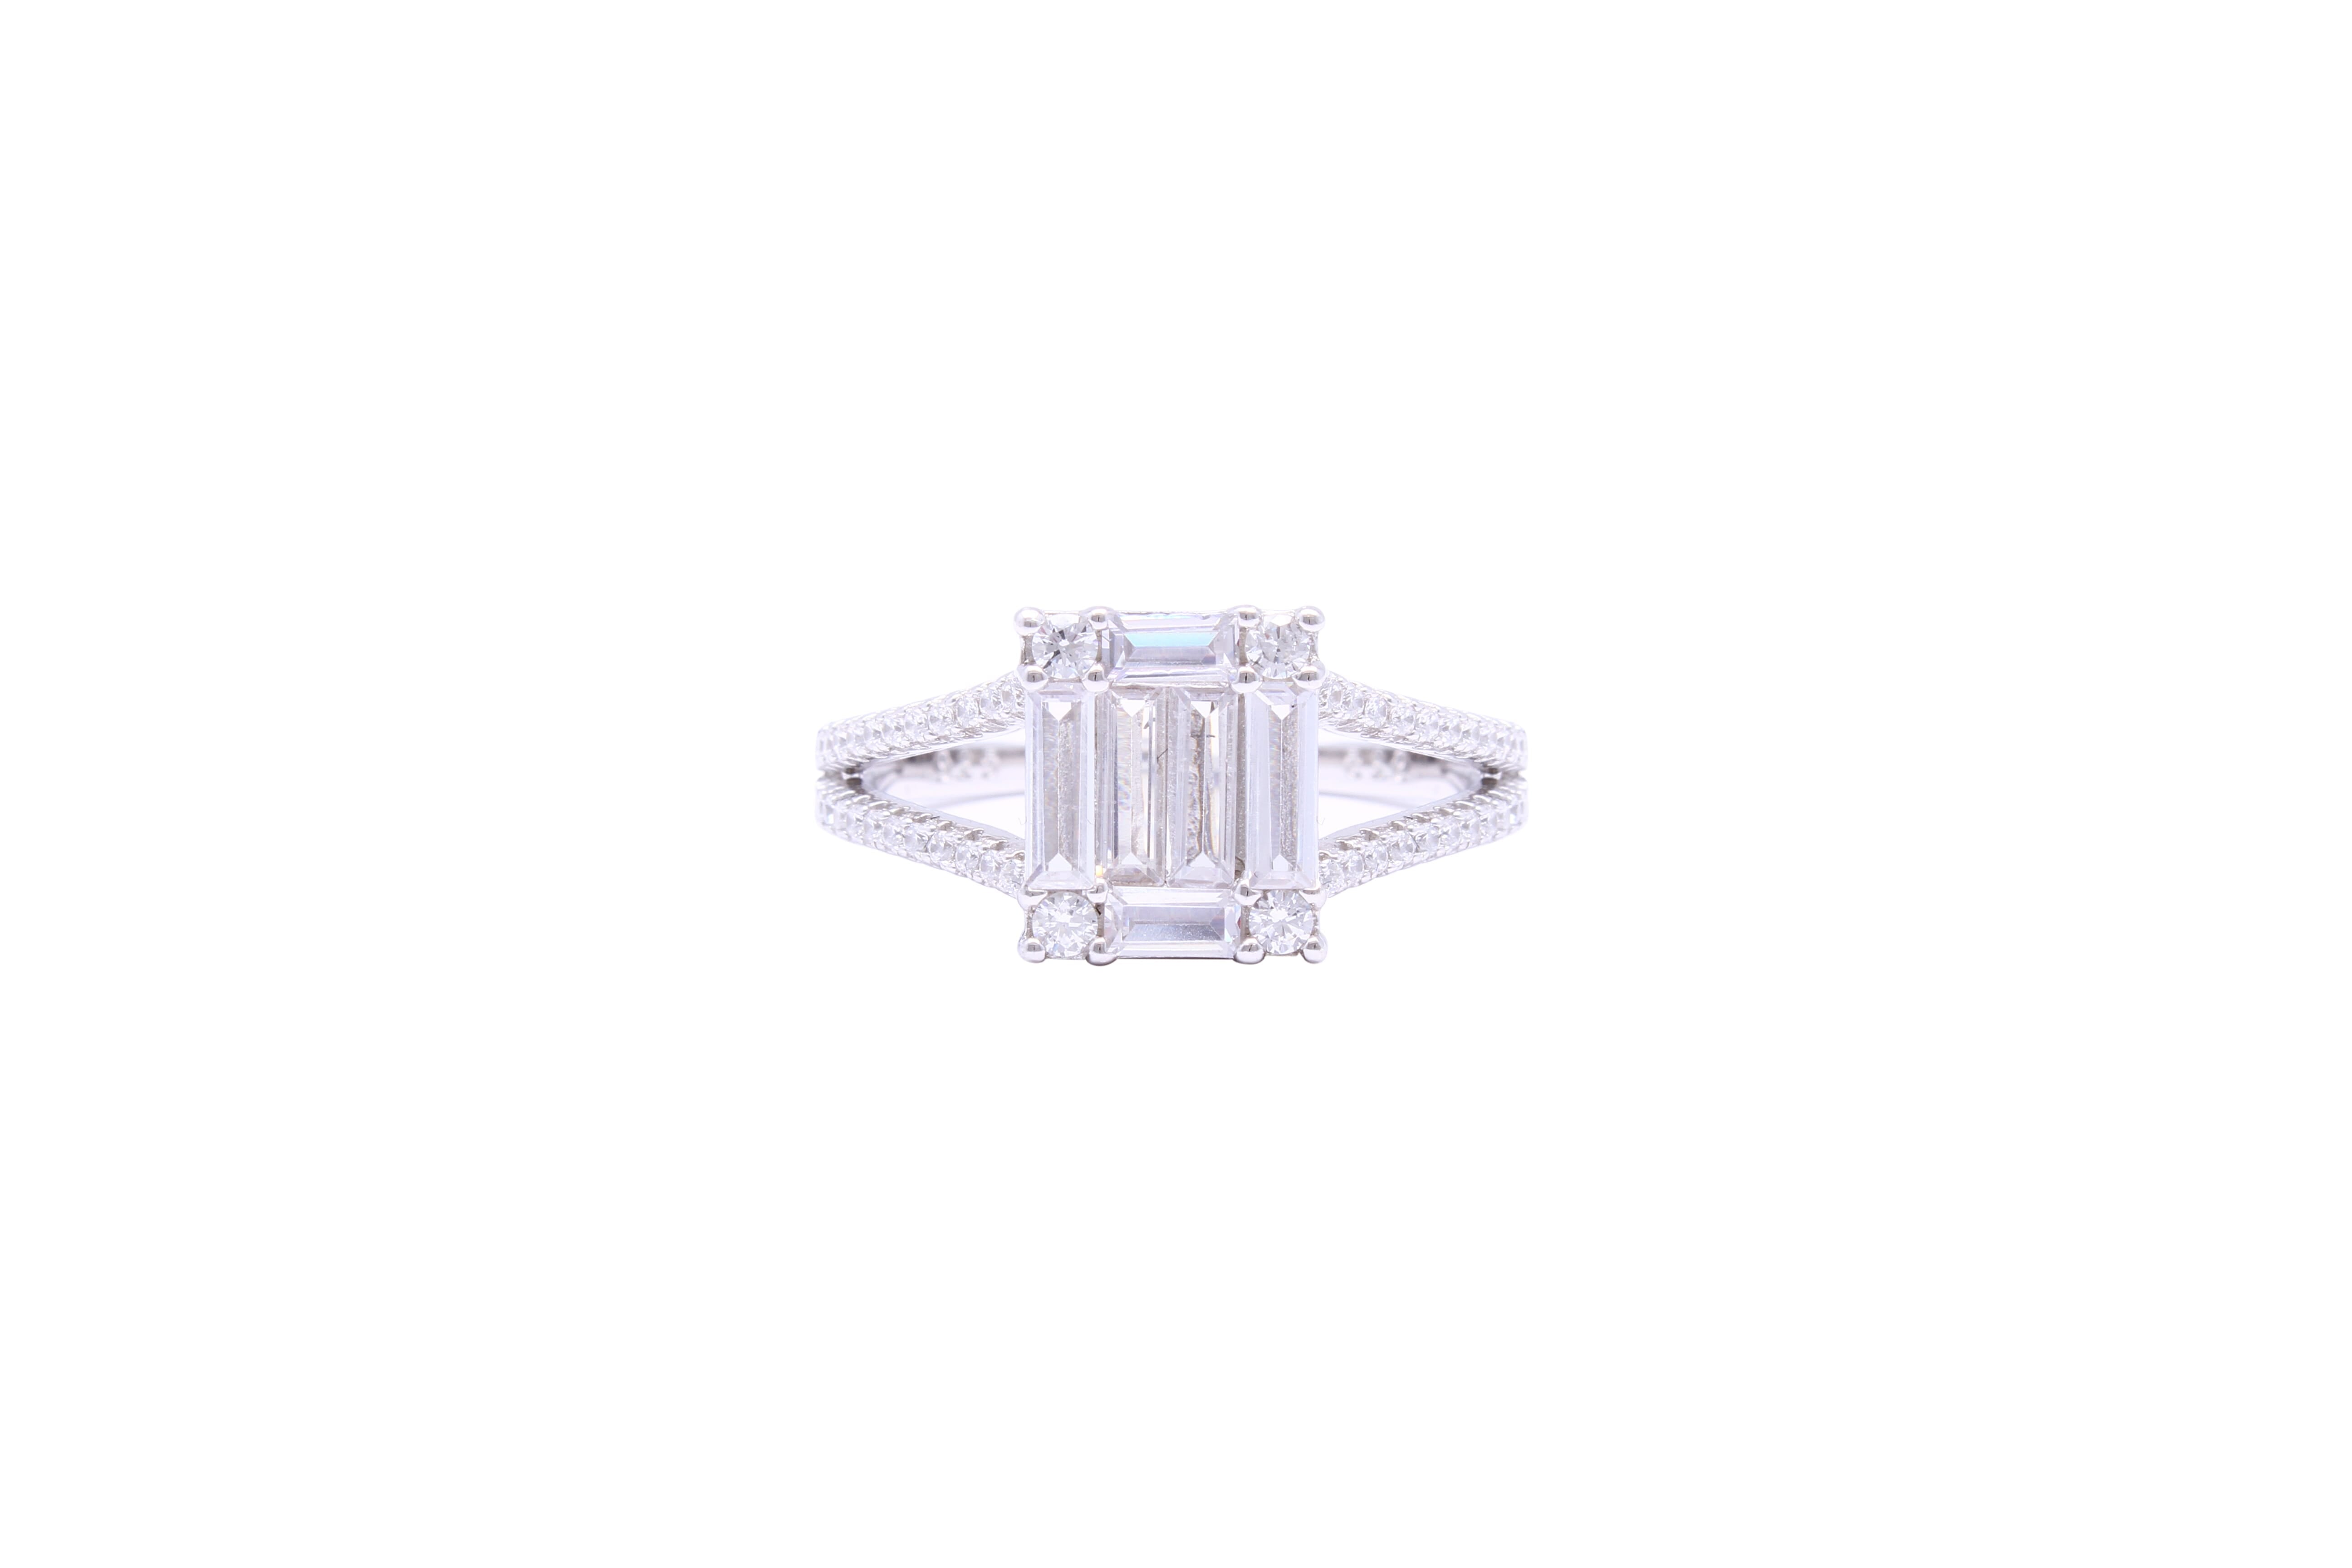 Asfour Crystal Fashion Ring With Inlaid With Baguette Zircon Stones In 925 Sterling Silver RD0007-8